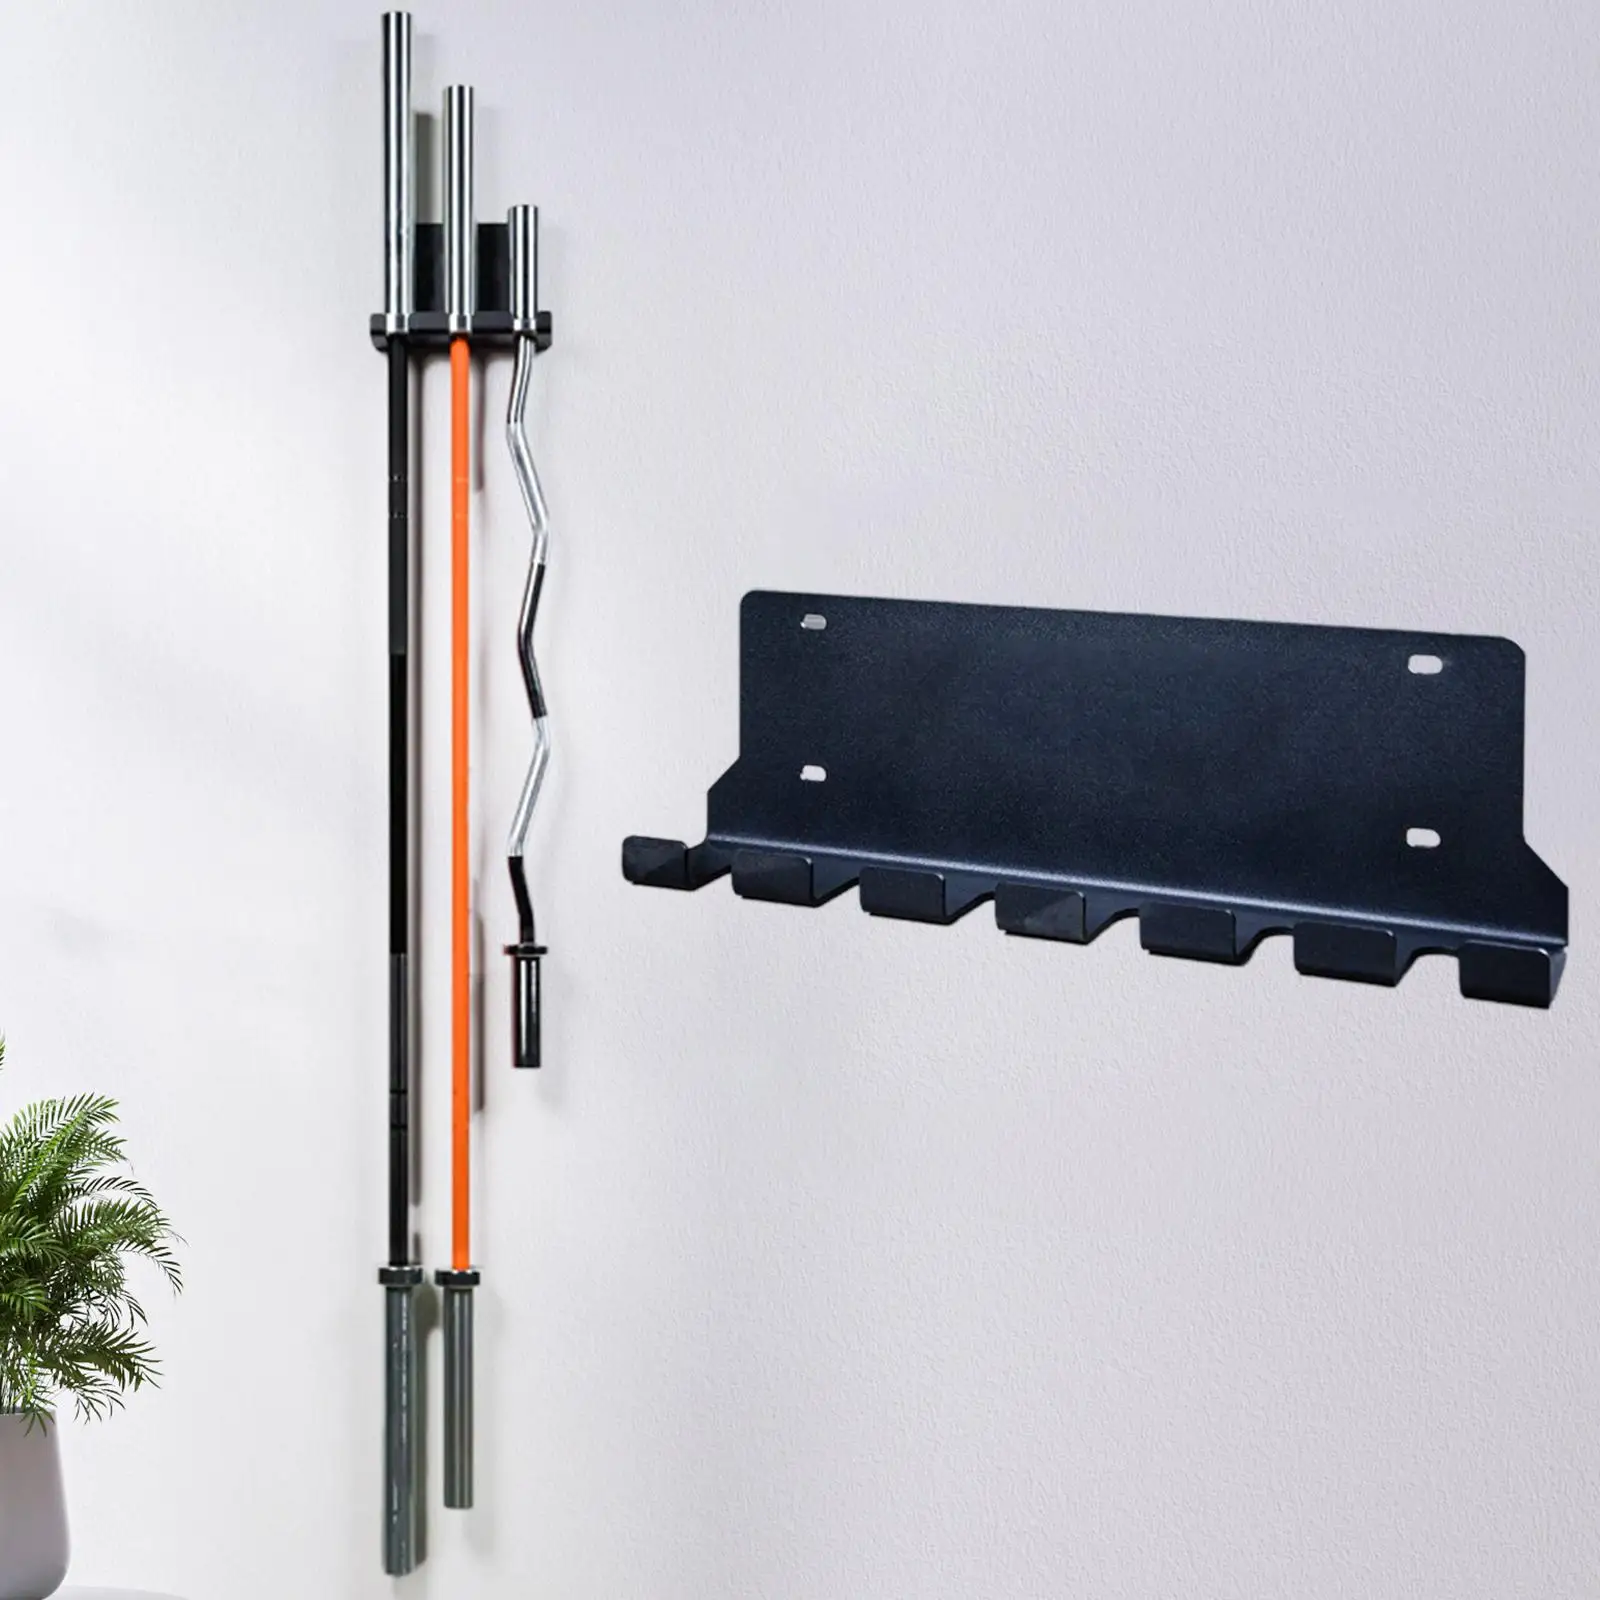 Barbell Holder Rack Display Weight Bar Rack Wall Mount Space